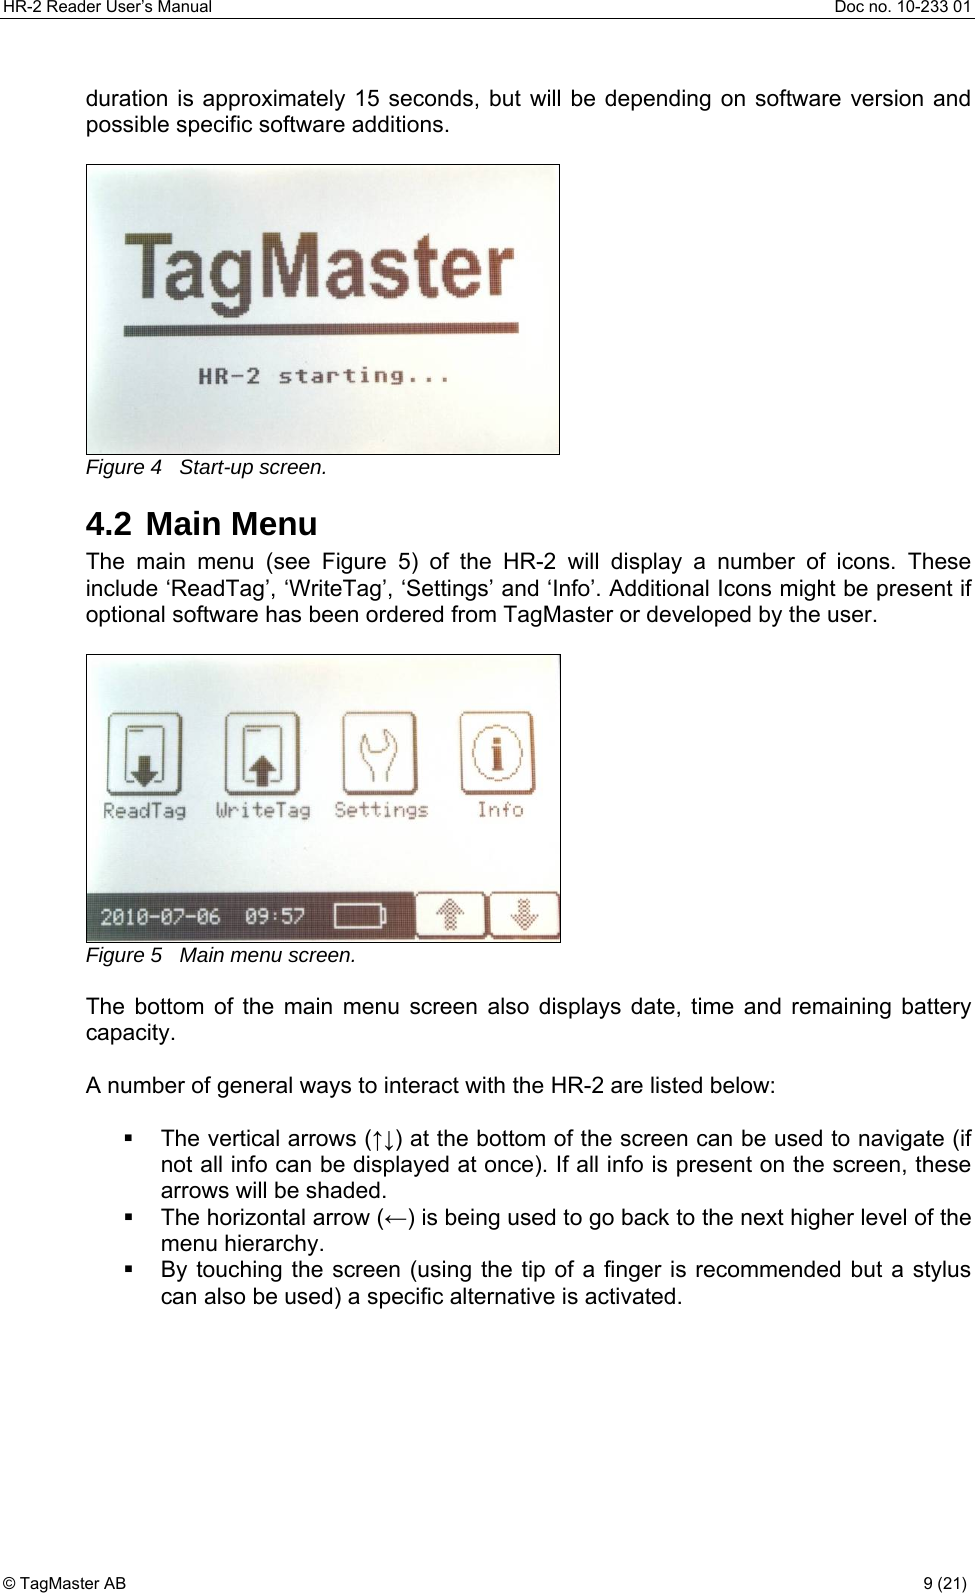 HR-2 Reader User’s Manual  Doc no. 10-233 01 © TagMaster AB  9 (21)   duration is approximately 15 seconds, but will be depending on software version and possible specific software additions.   Figure 4   Start-up screen. 4.2 Main Menu The main menu (see Figure 5) of the HR-2 will display a number of icons. These include ‘ReadTag’, ‘WriteTag’, ‘Settings’ and ‘Info’. Additional Icons might be present if optional software has been ordered from TagMaster or developed by the user.   Figure 5   Main menu screen.   The bottom of the main menu screen also displays date, time and remaining battery capacity.  A number of general ways to interact with the HR-2 are listed below:     The vertical arrows (↑↓) at the bottom of the screen can be used to navigate (if not all info can be displayed at once). If all info is present on the screen, these arrows will be shaded.    The horizontal arrow (←) is being used to go back to the next higher level of the menu hierarchy.   By touching the screen (using the tip of a finger is recommended but a stylus can also be used) a specific alternative is activated.        